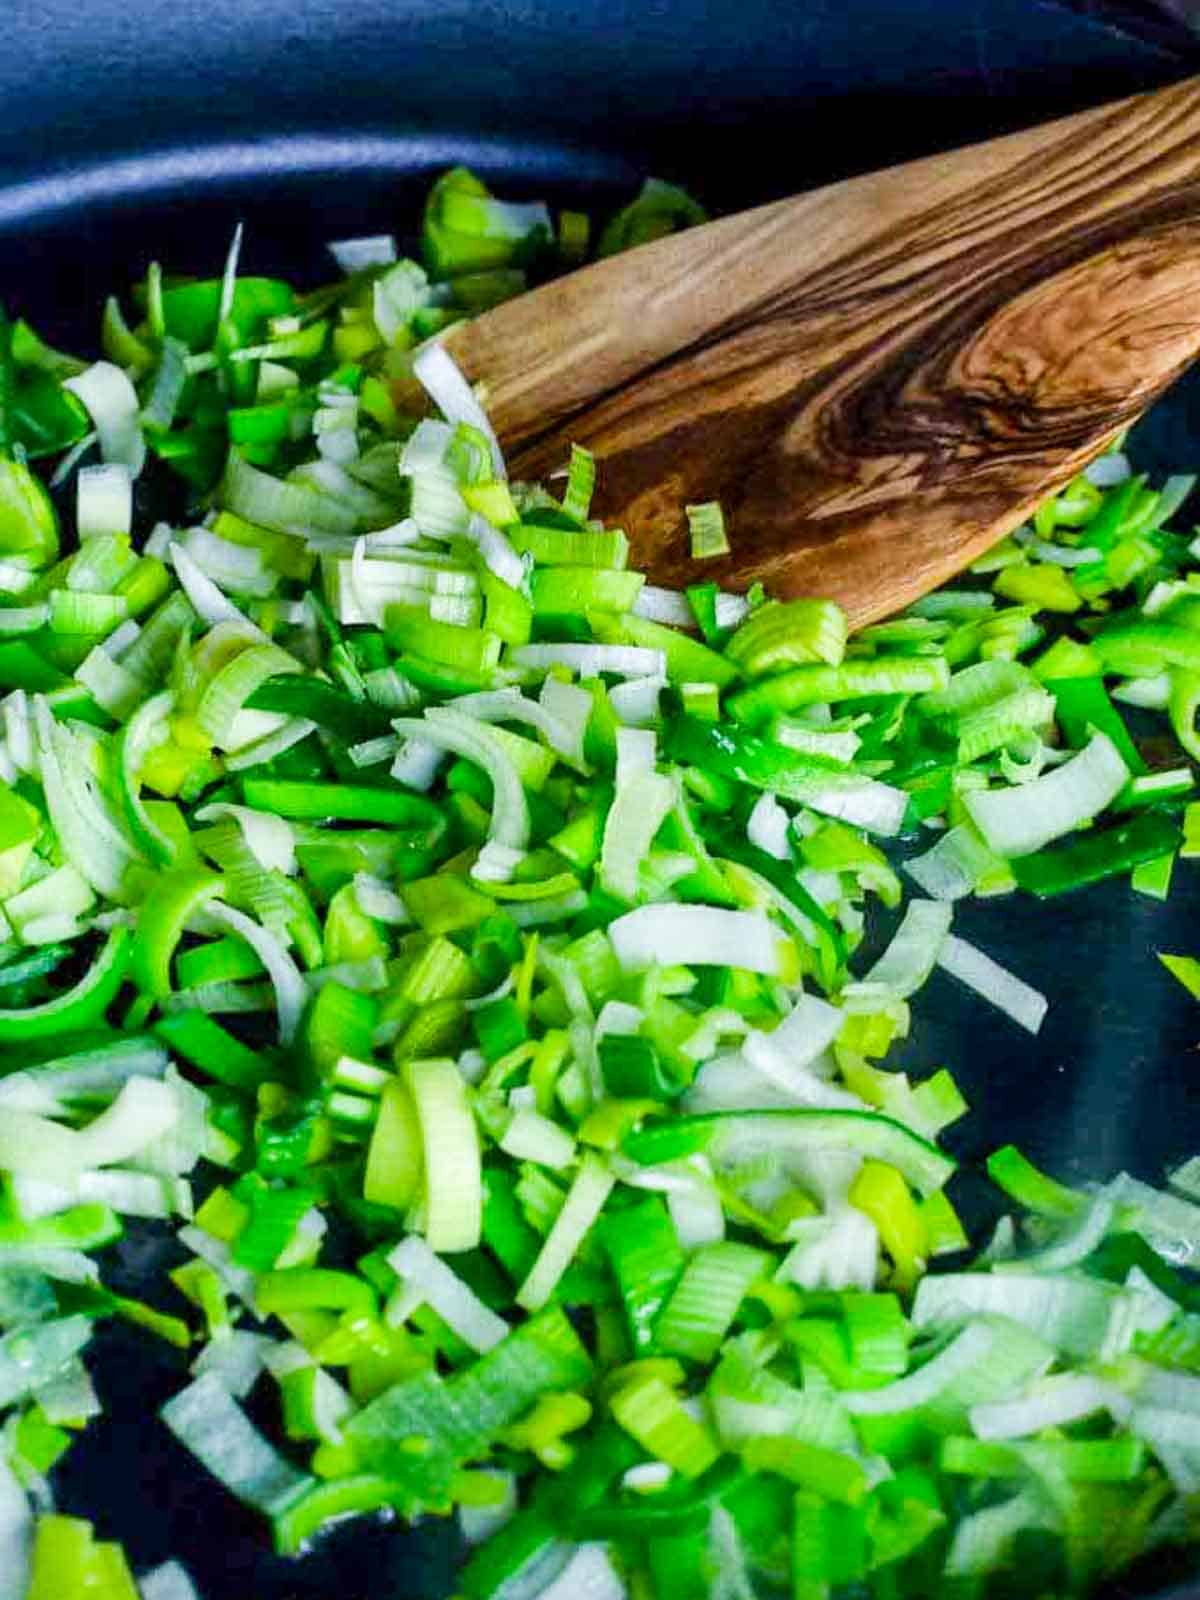 Chopped leeks stirred in a pan with an olive wood spoon.